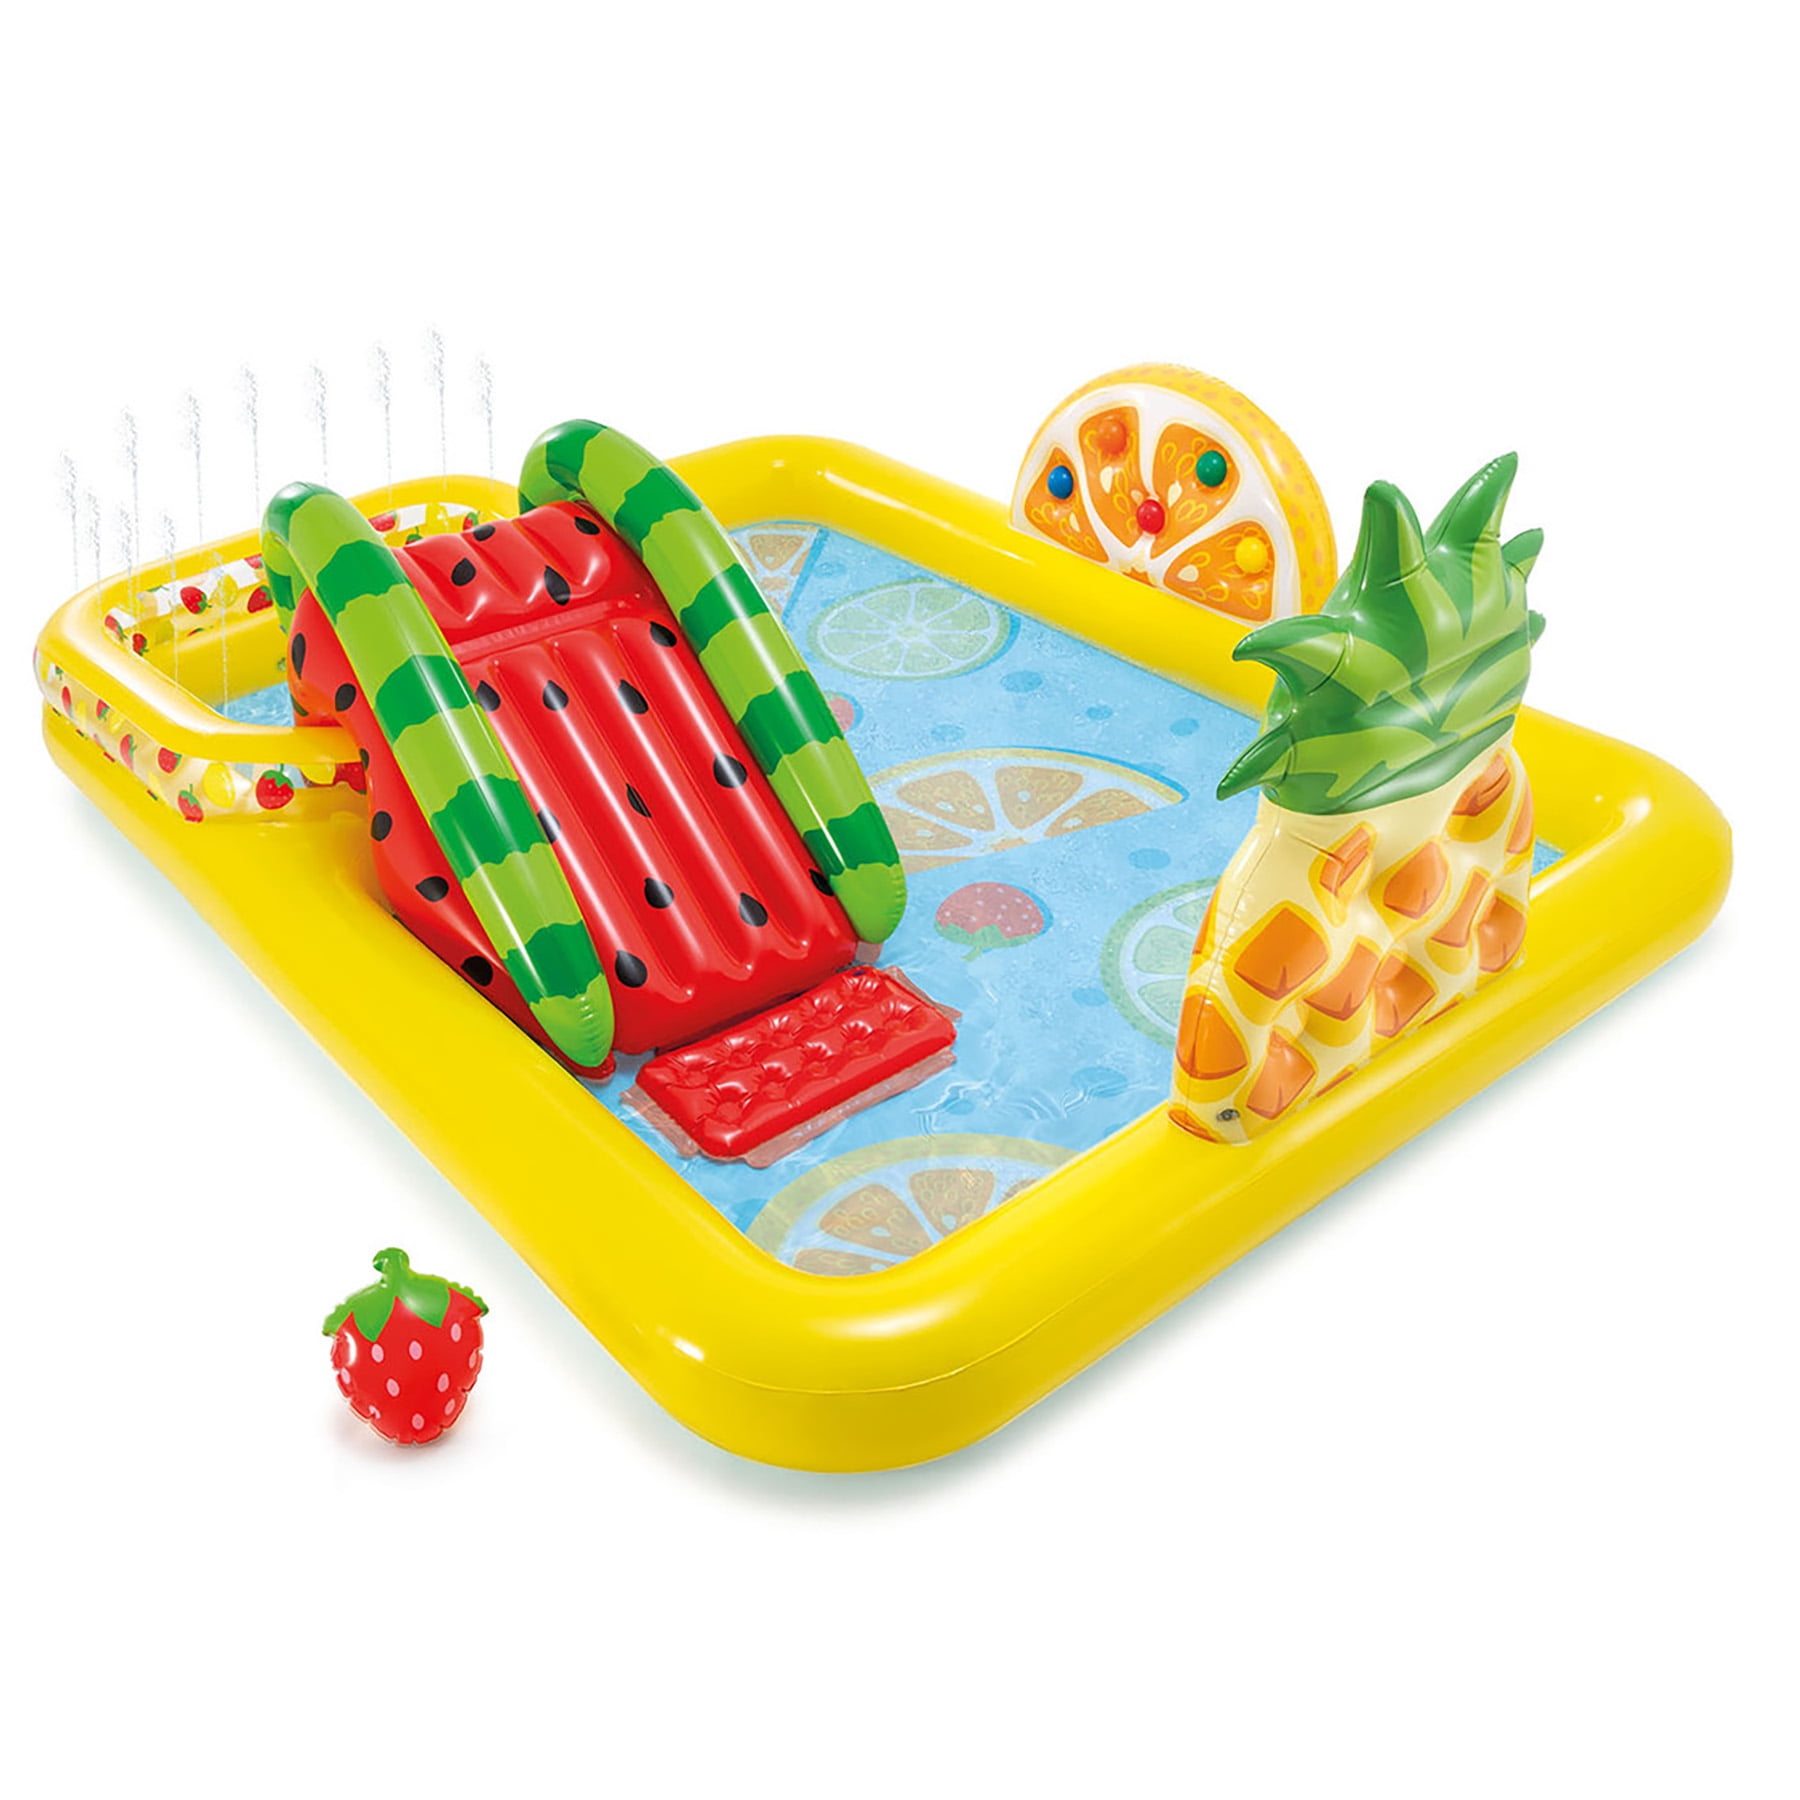 Intex Gator Inflatable Swimming Pool with Water Sprayer, 127